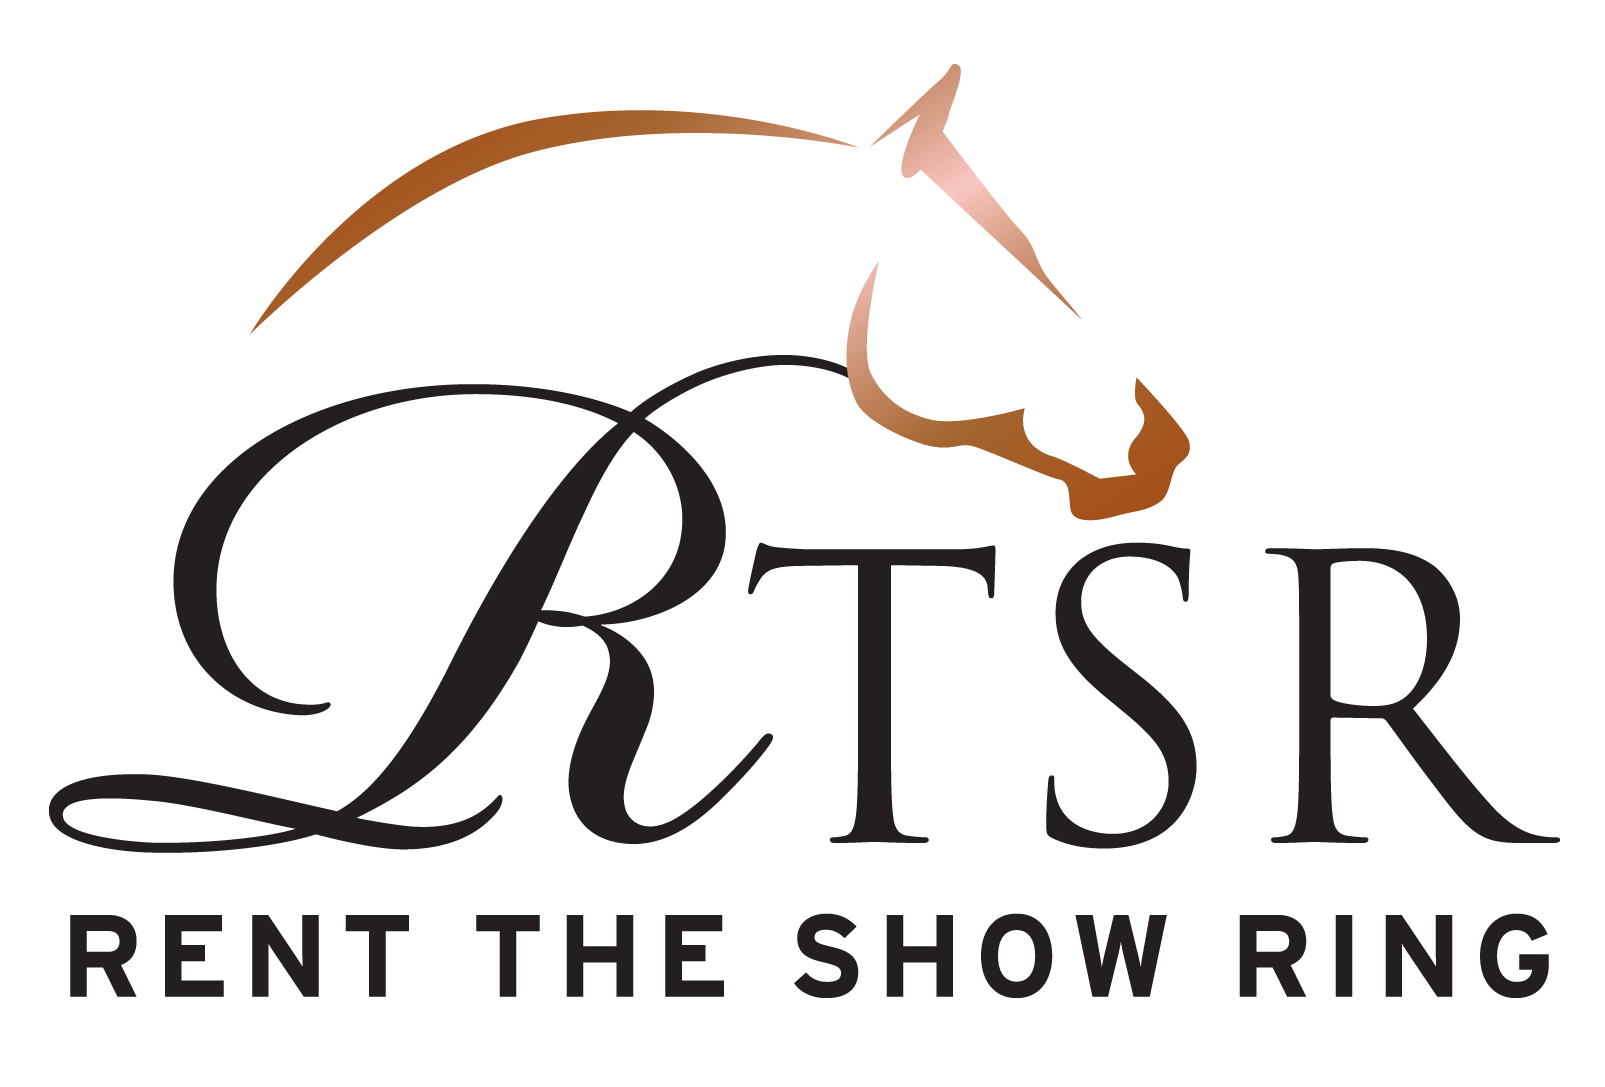 Rent the Show Ring